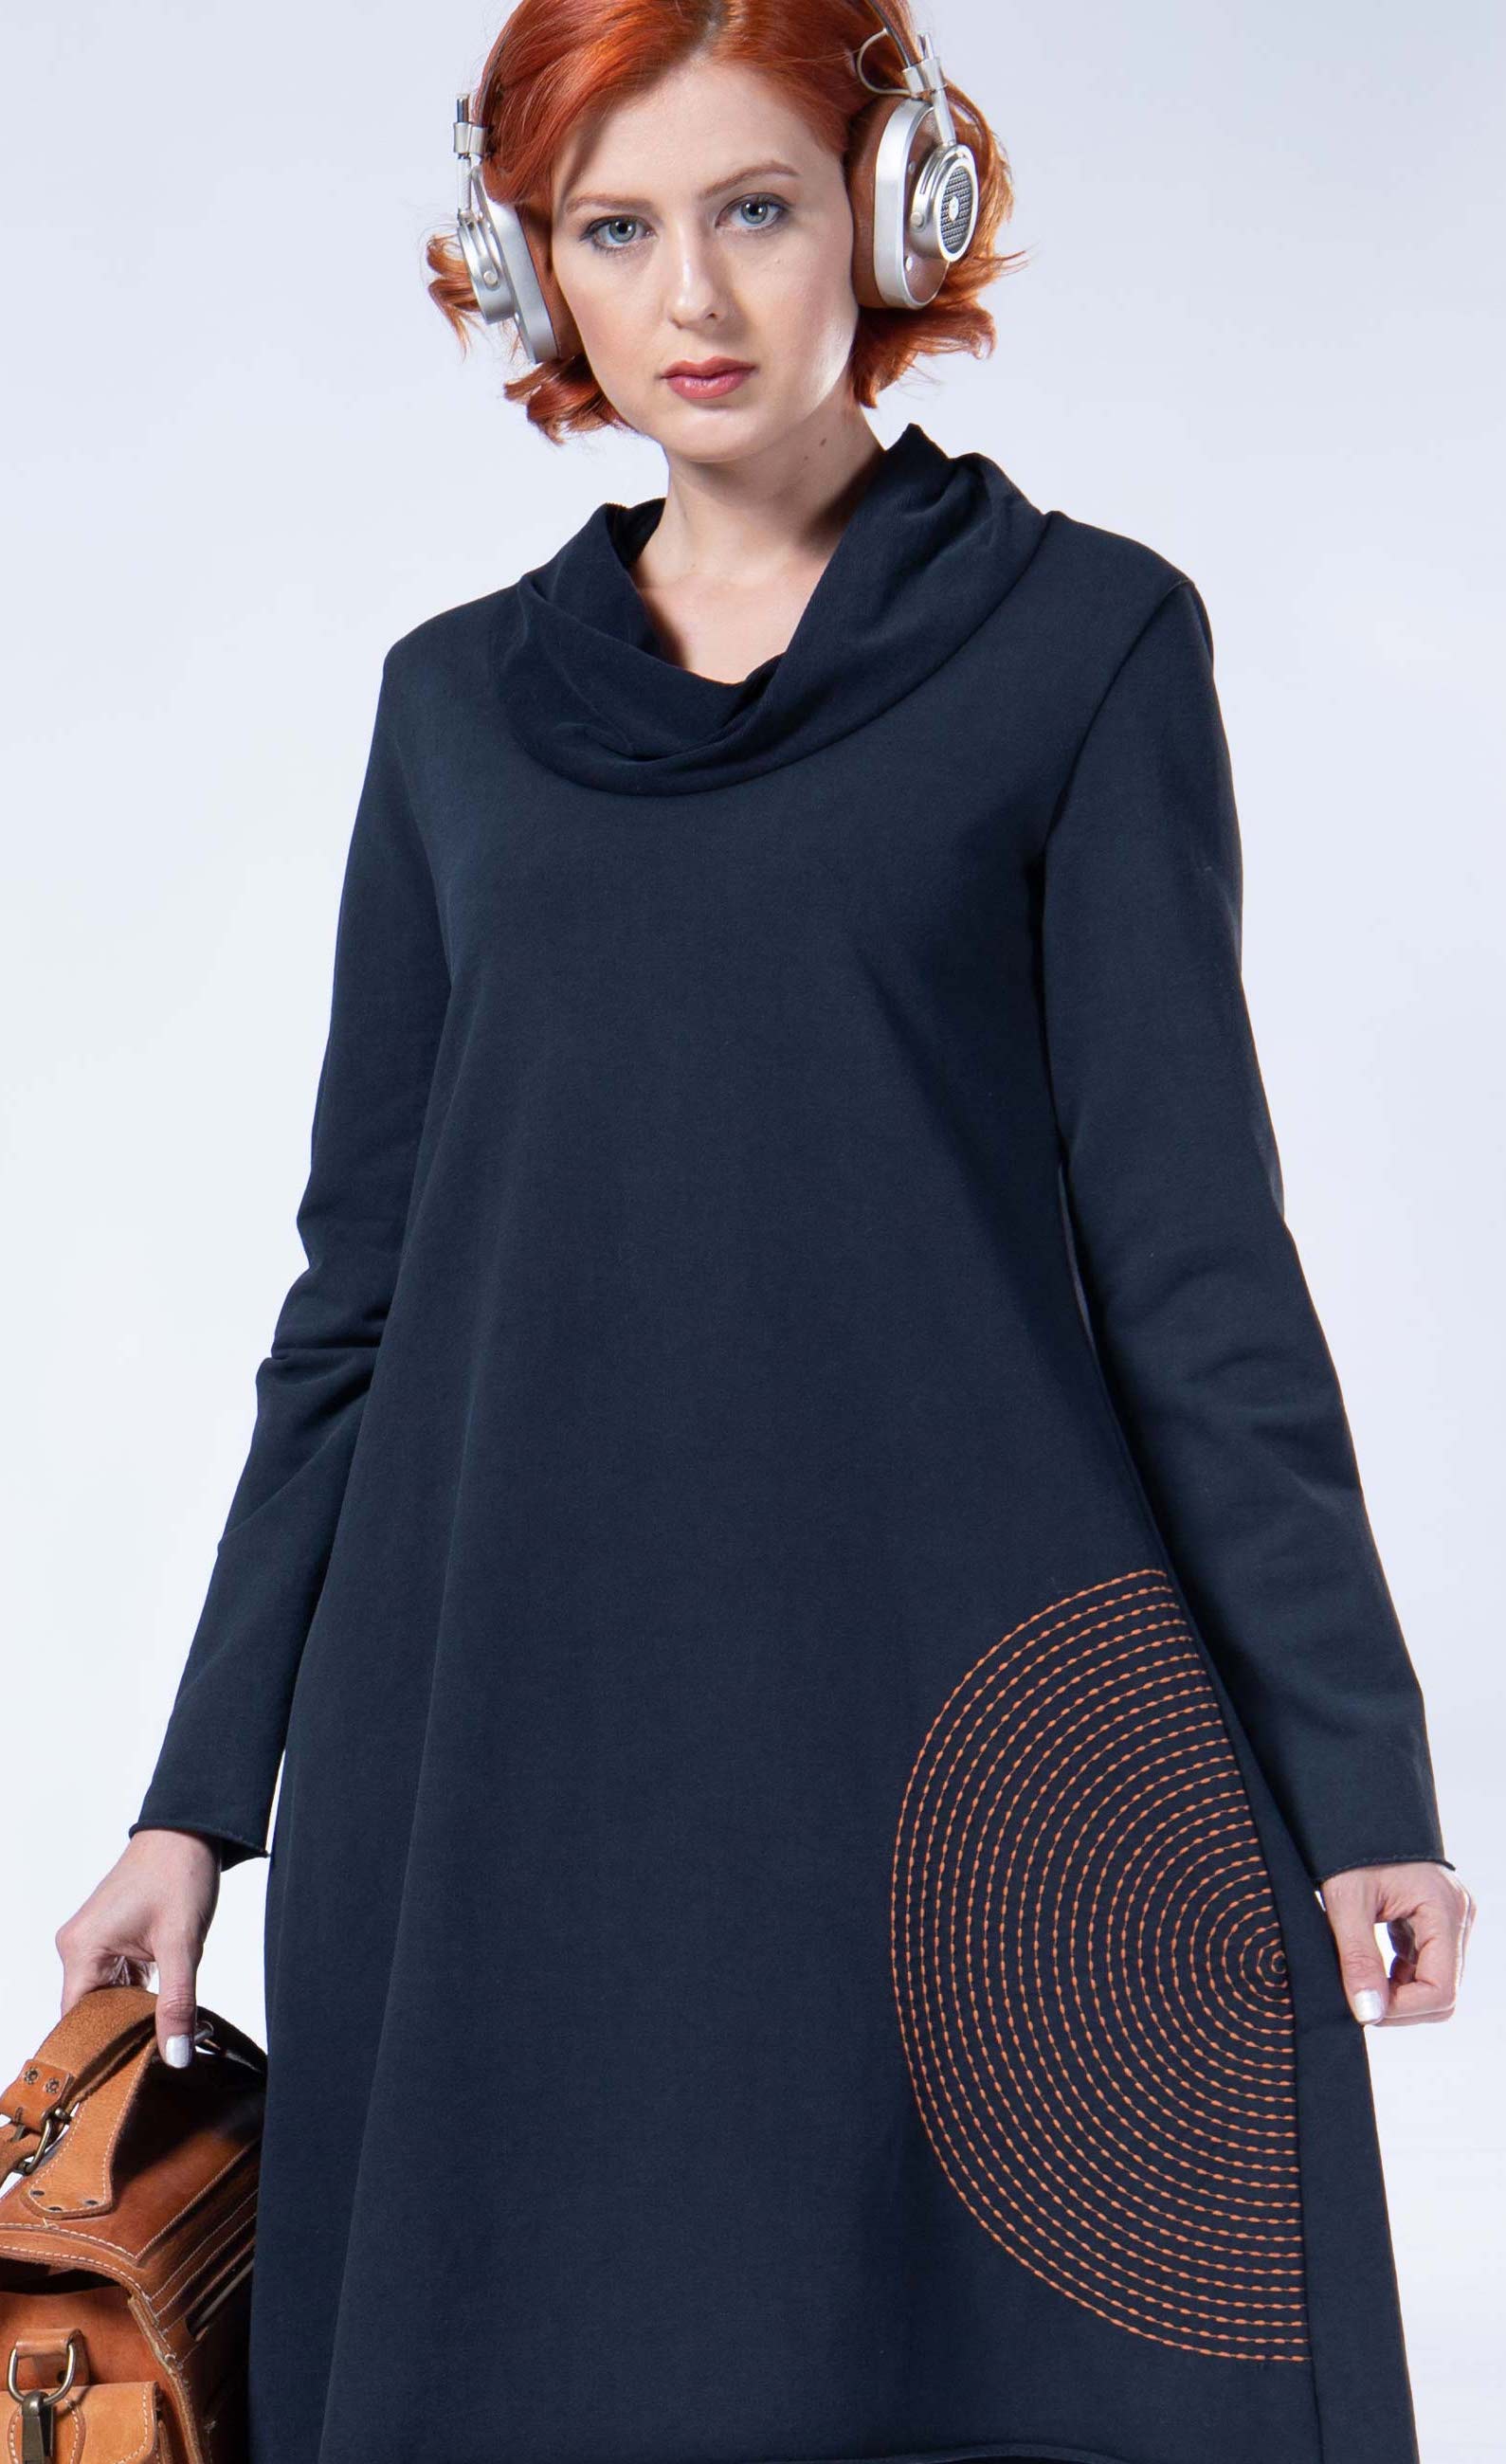 front top half view of a woman wearing the luukaa circles tunic/dress. This dress is black with an orange half-circle in the bottom left hand corner. The dress has long sleeves, a cowl neck, and sits at the knees.